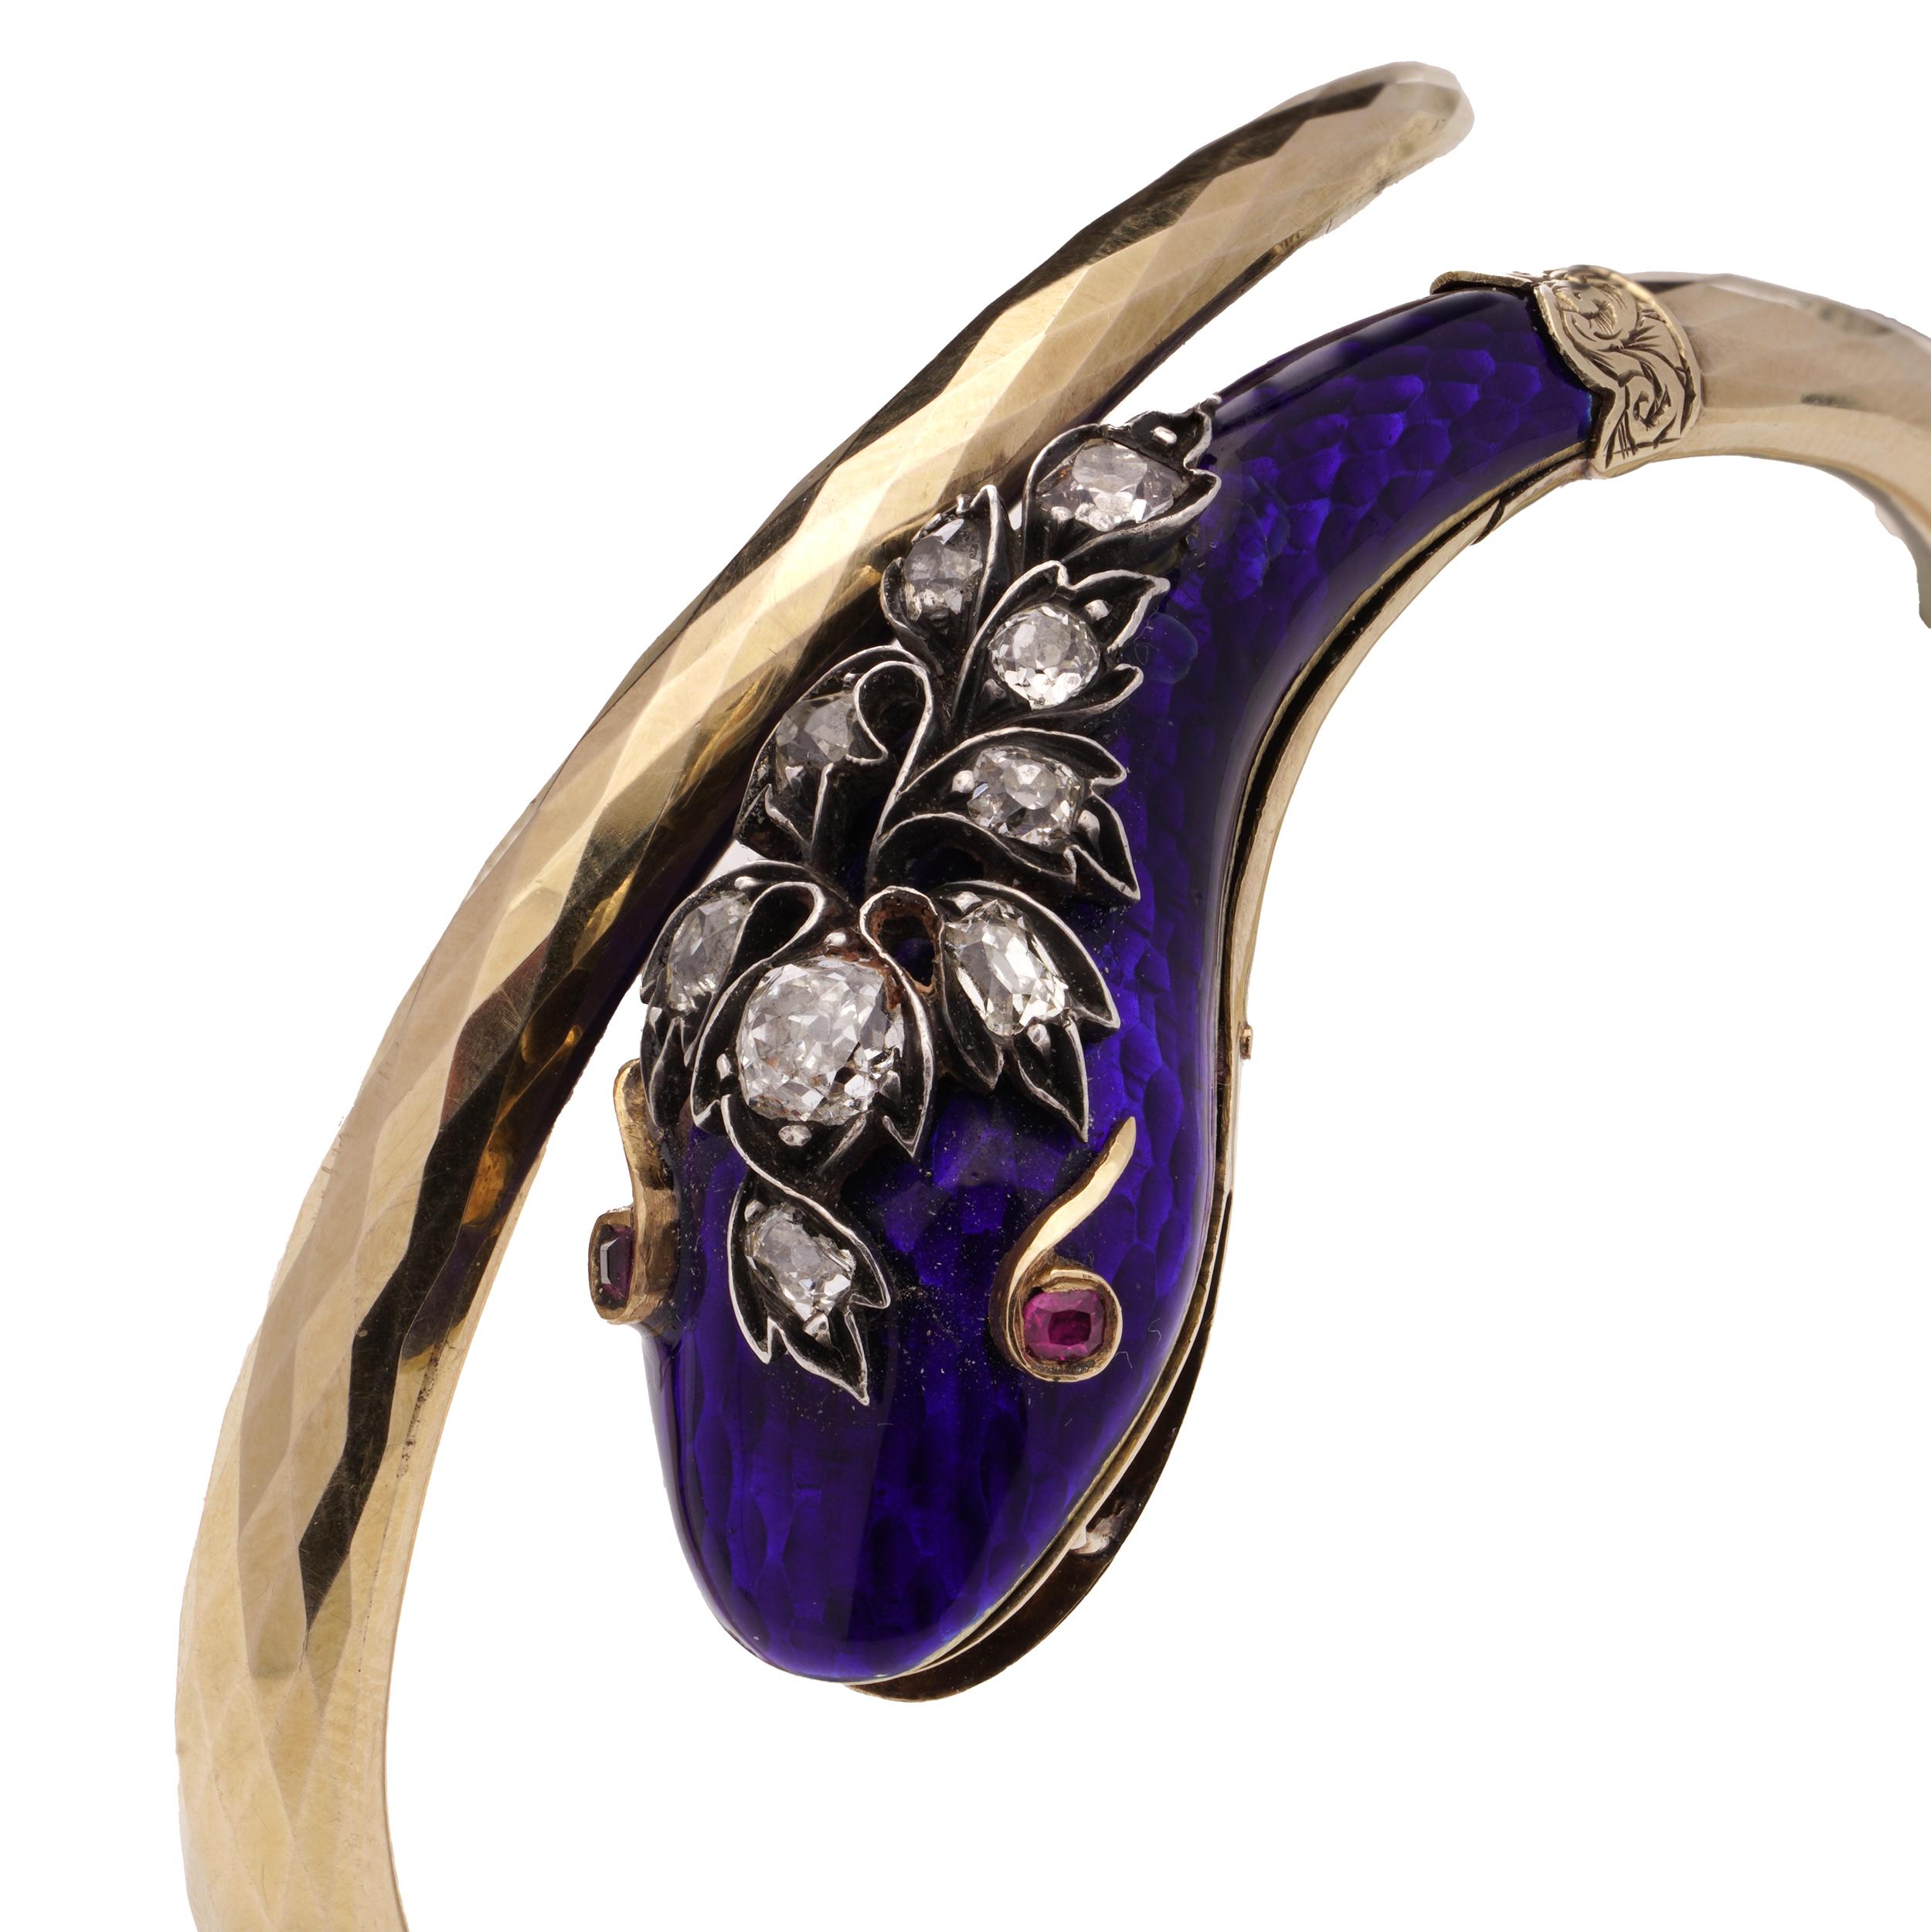 Victorian 12kt. gold and silver Snake serpent bangle with old cut diamond For Sale 2